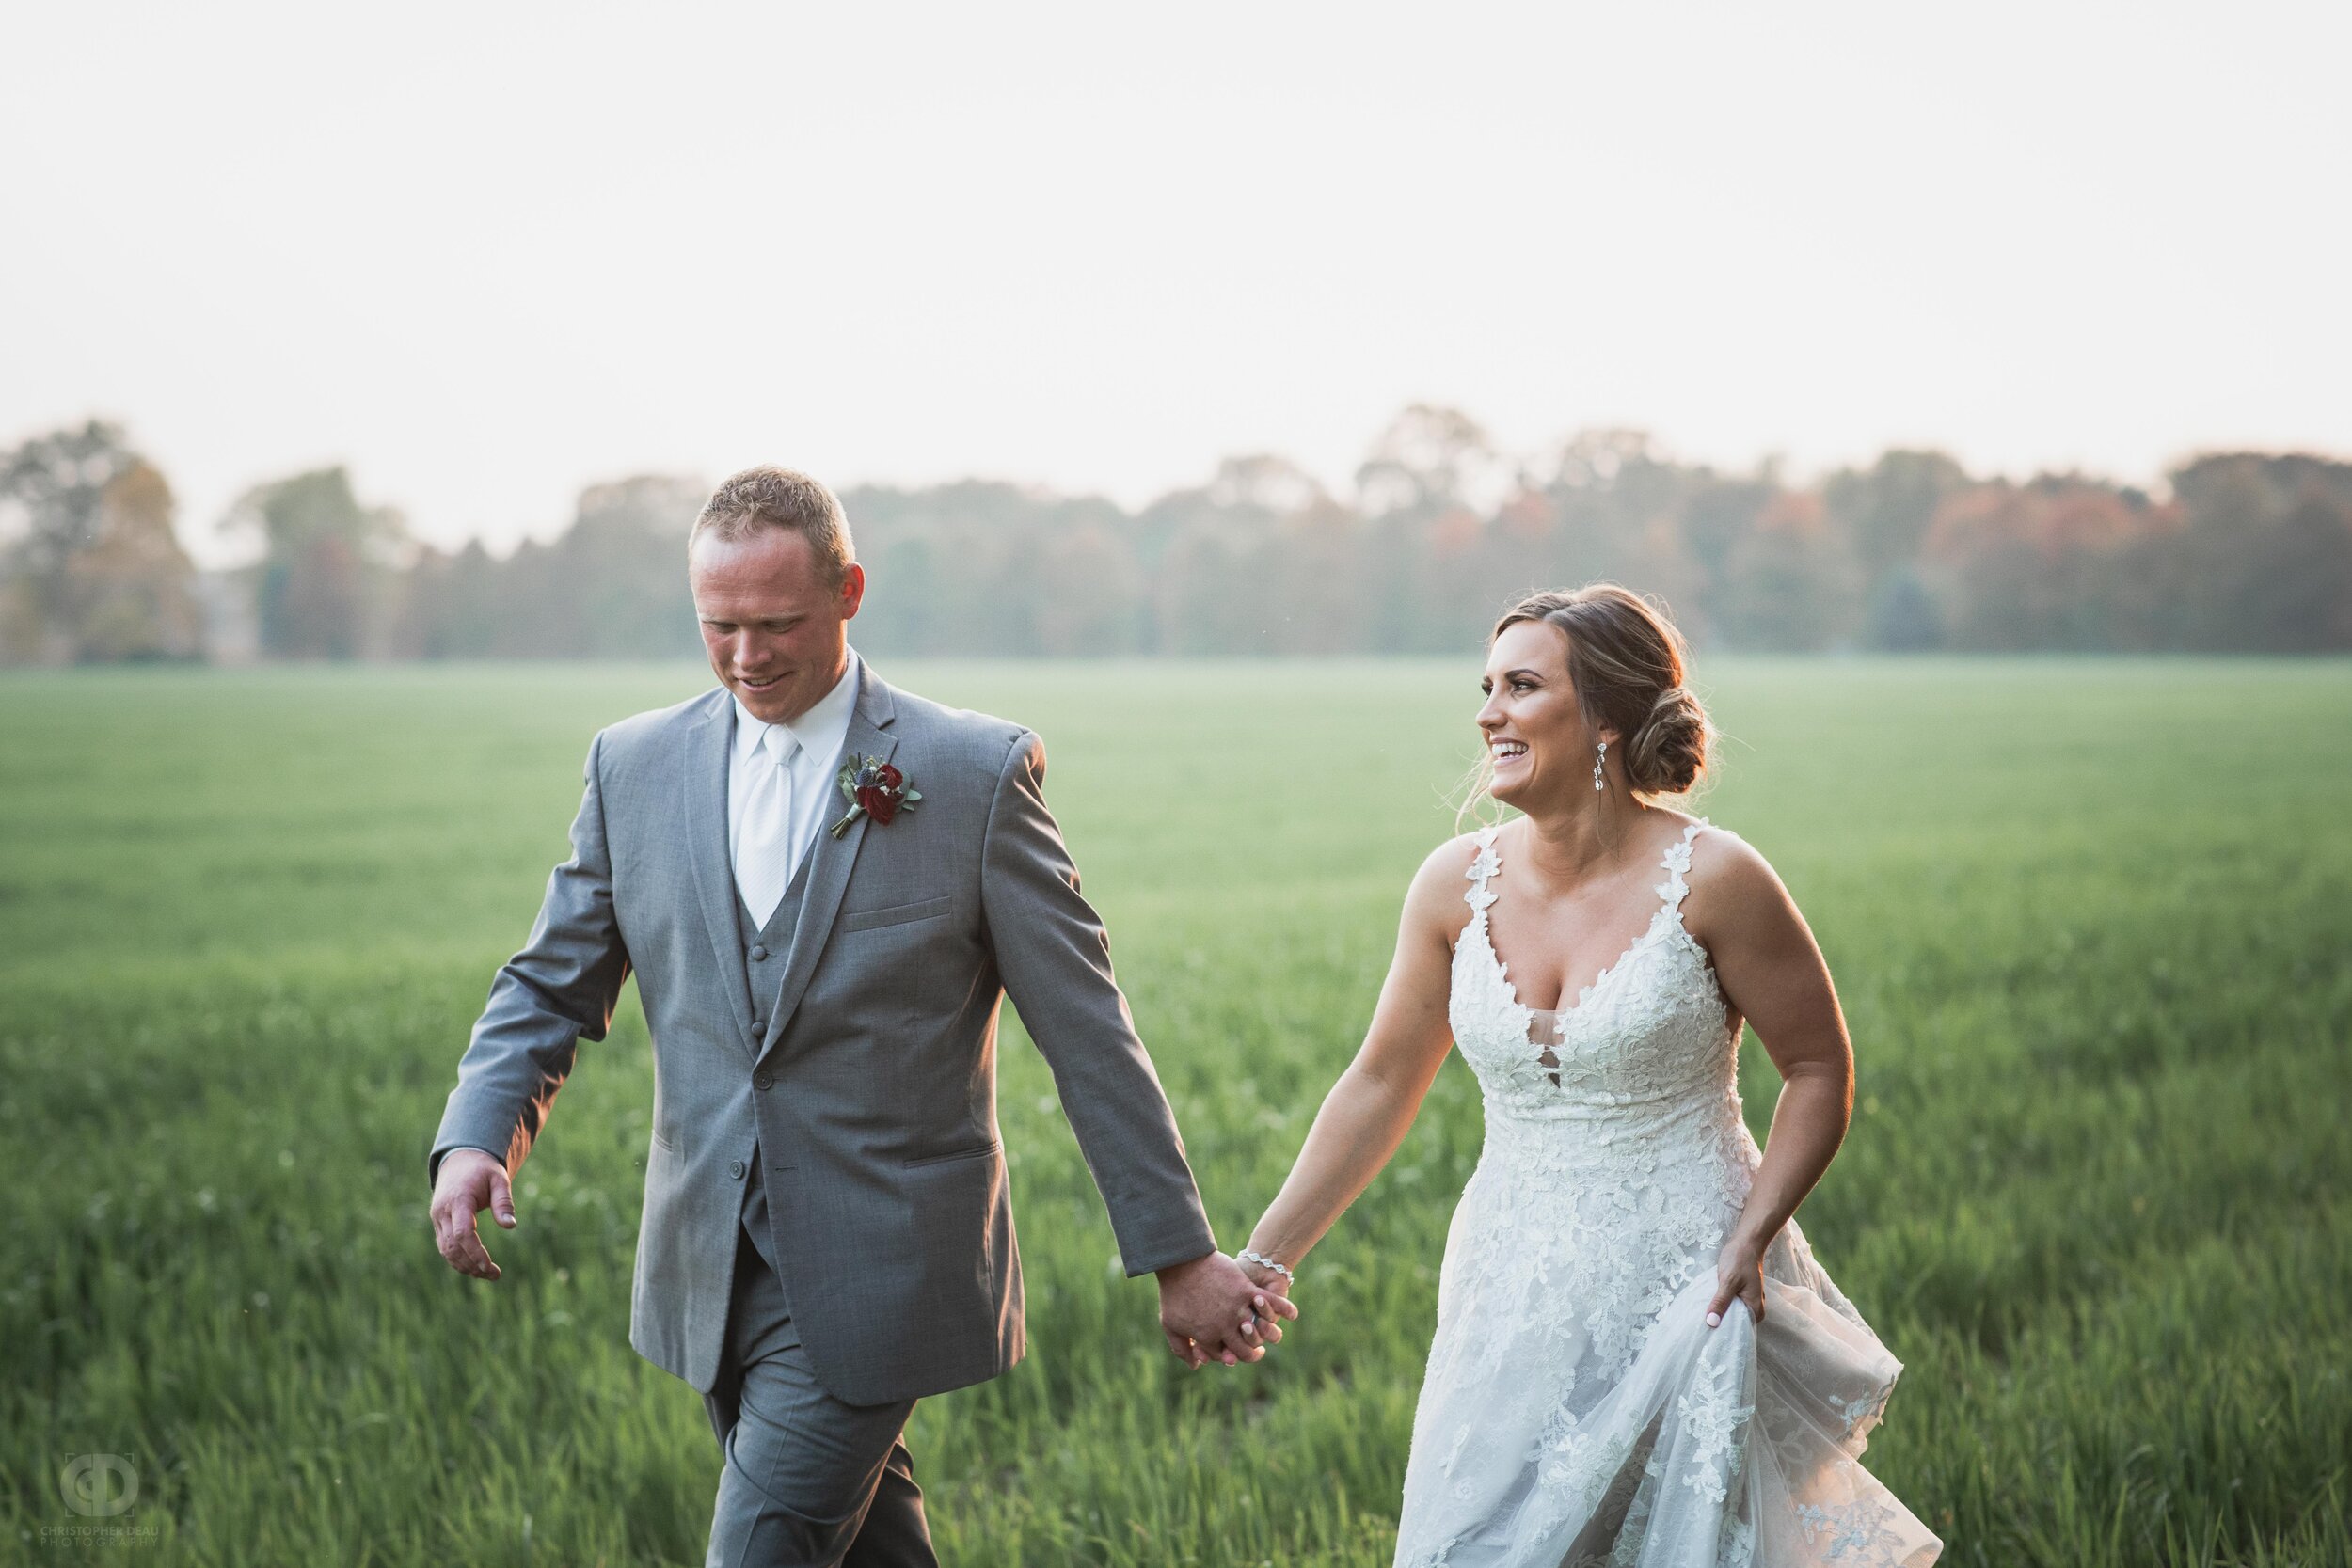  bride and groom walk through green field during sunset on their wedding day 